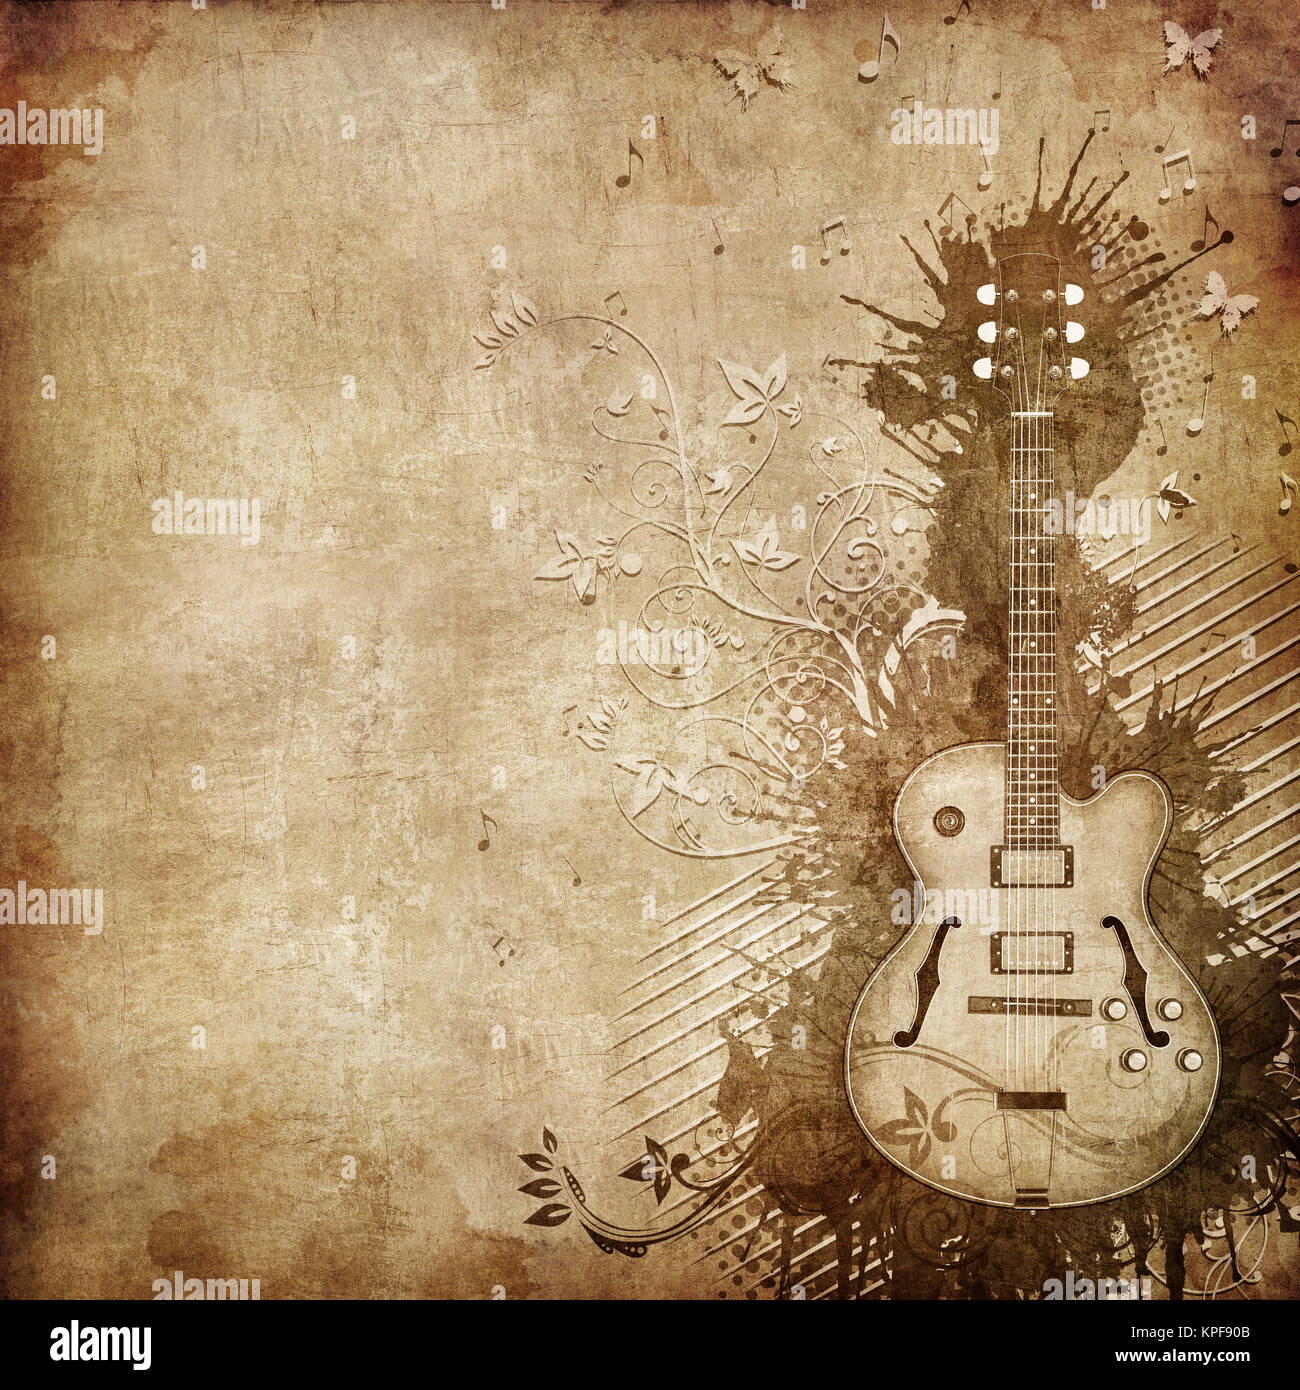 Old Paper. Retro Music Texture Background. Vector Stock Photo - Alamy